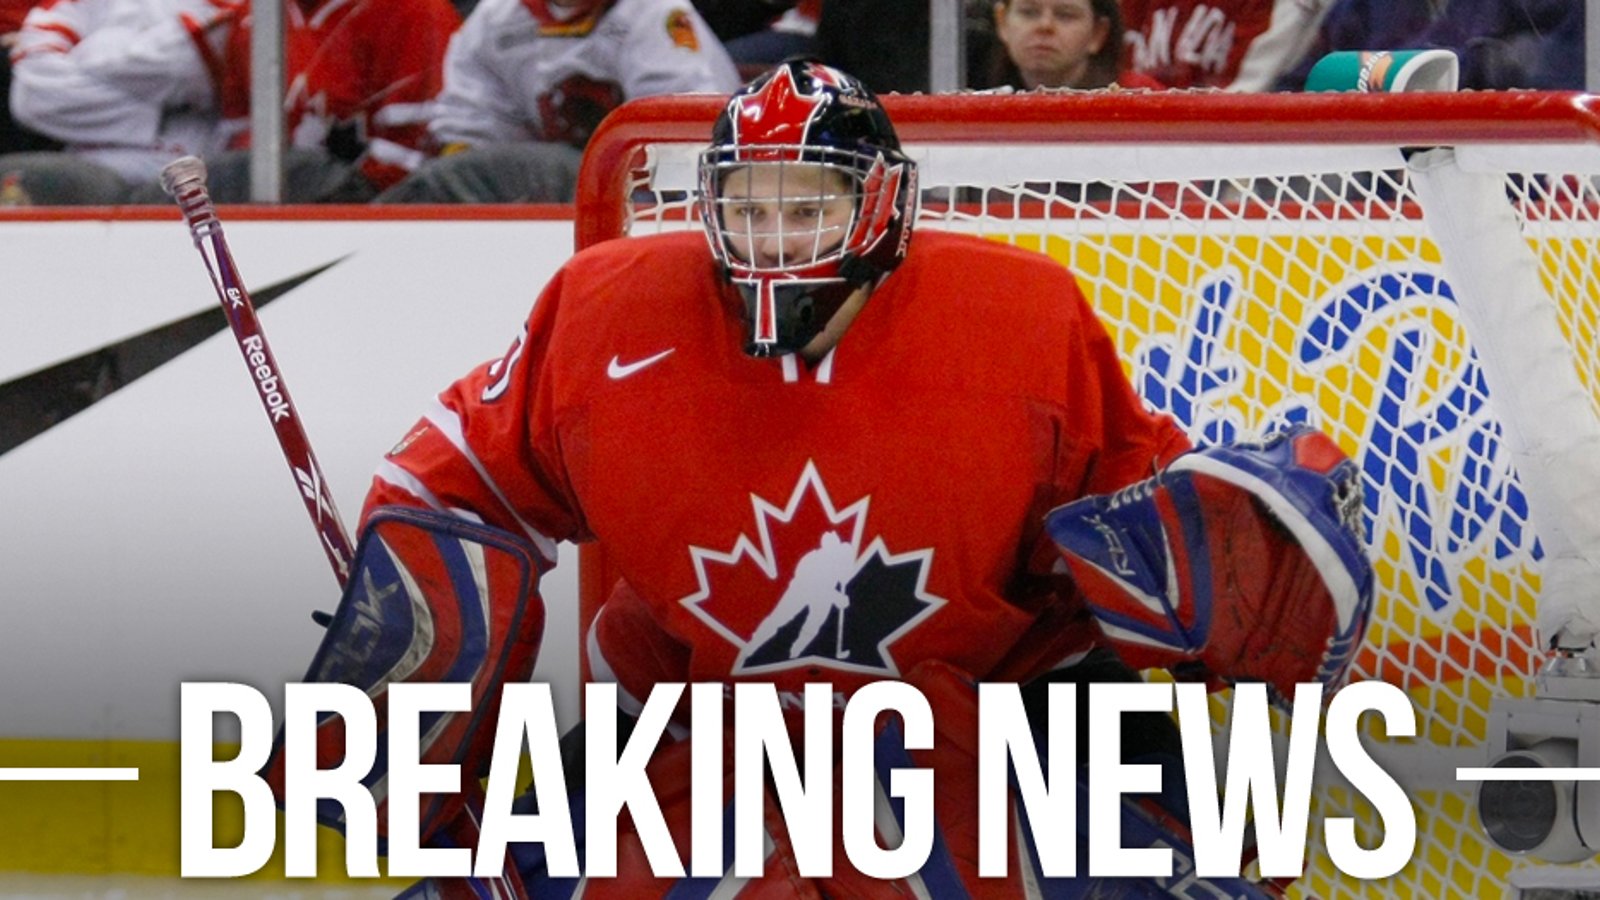 Former Canadian junior star Dustin Tokarski signs a new NHL contract